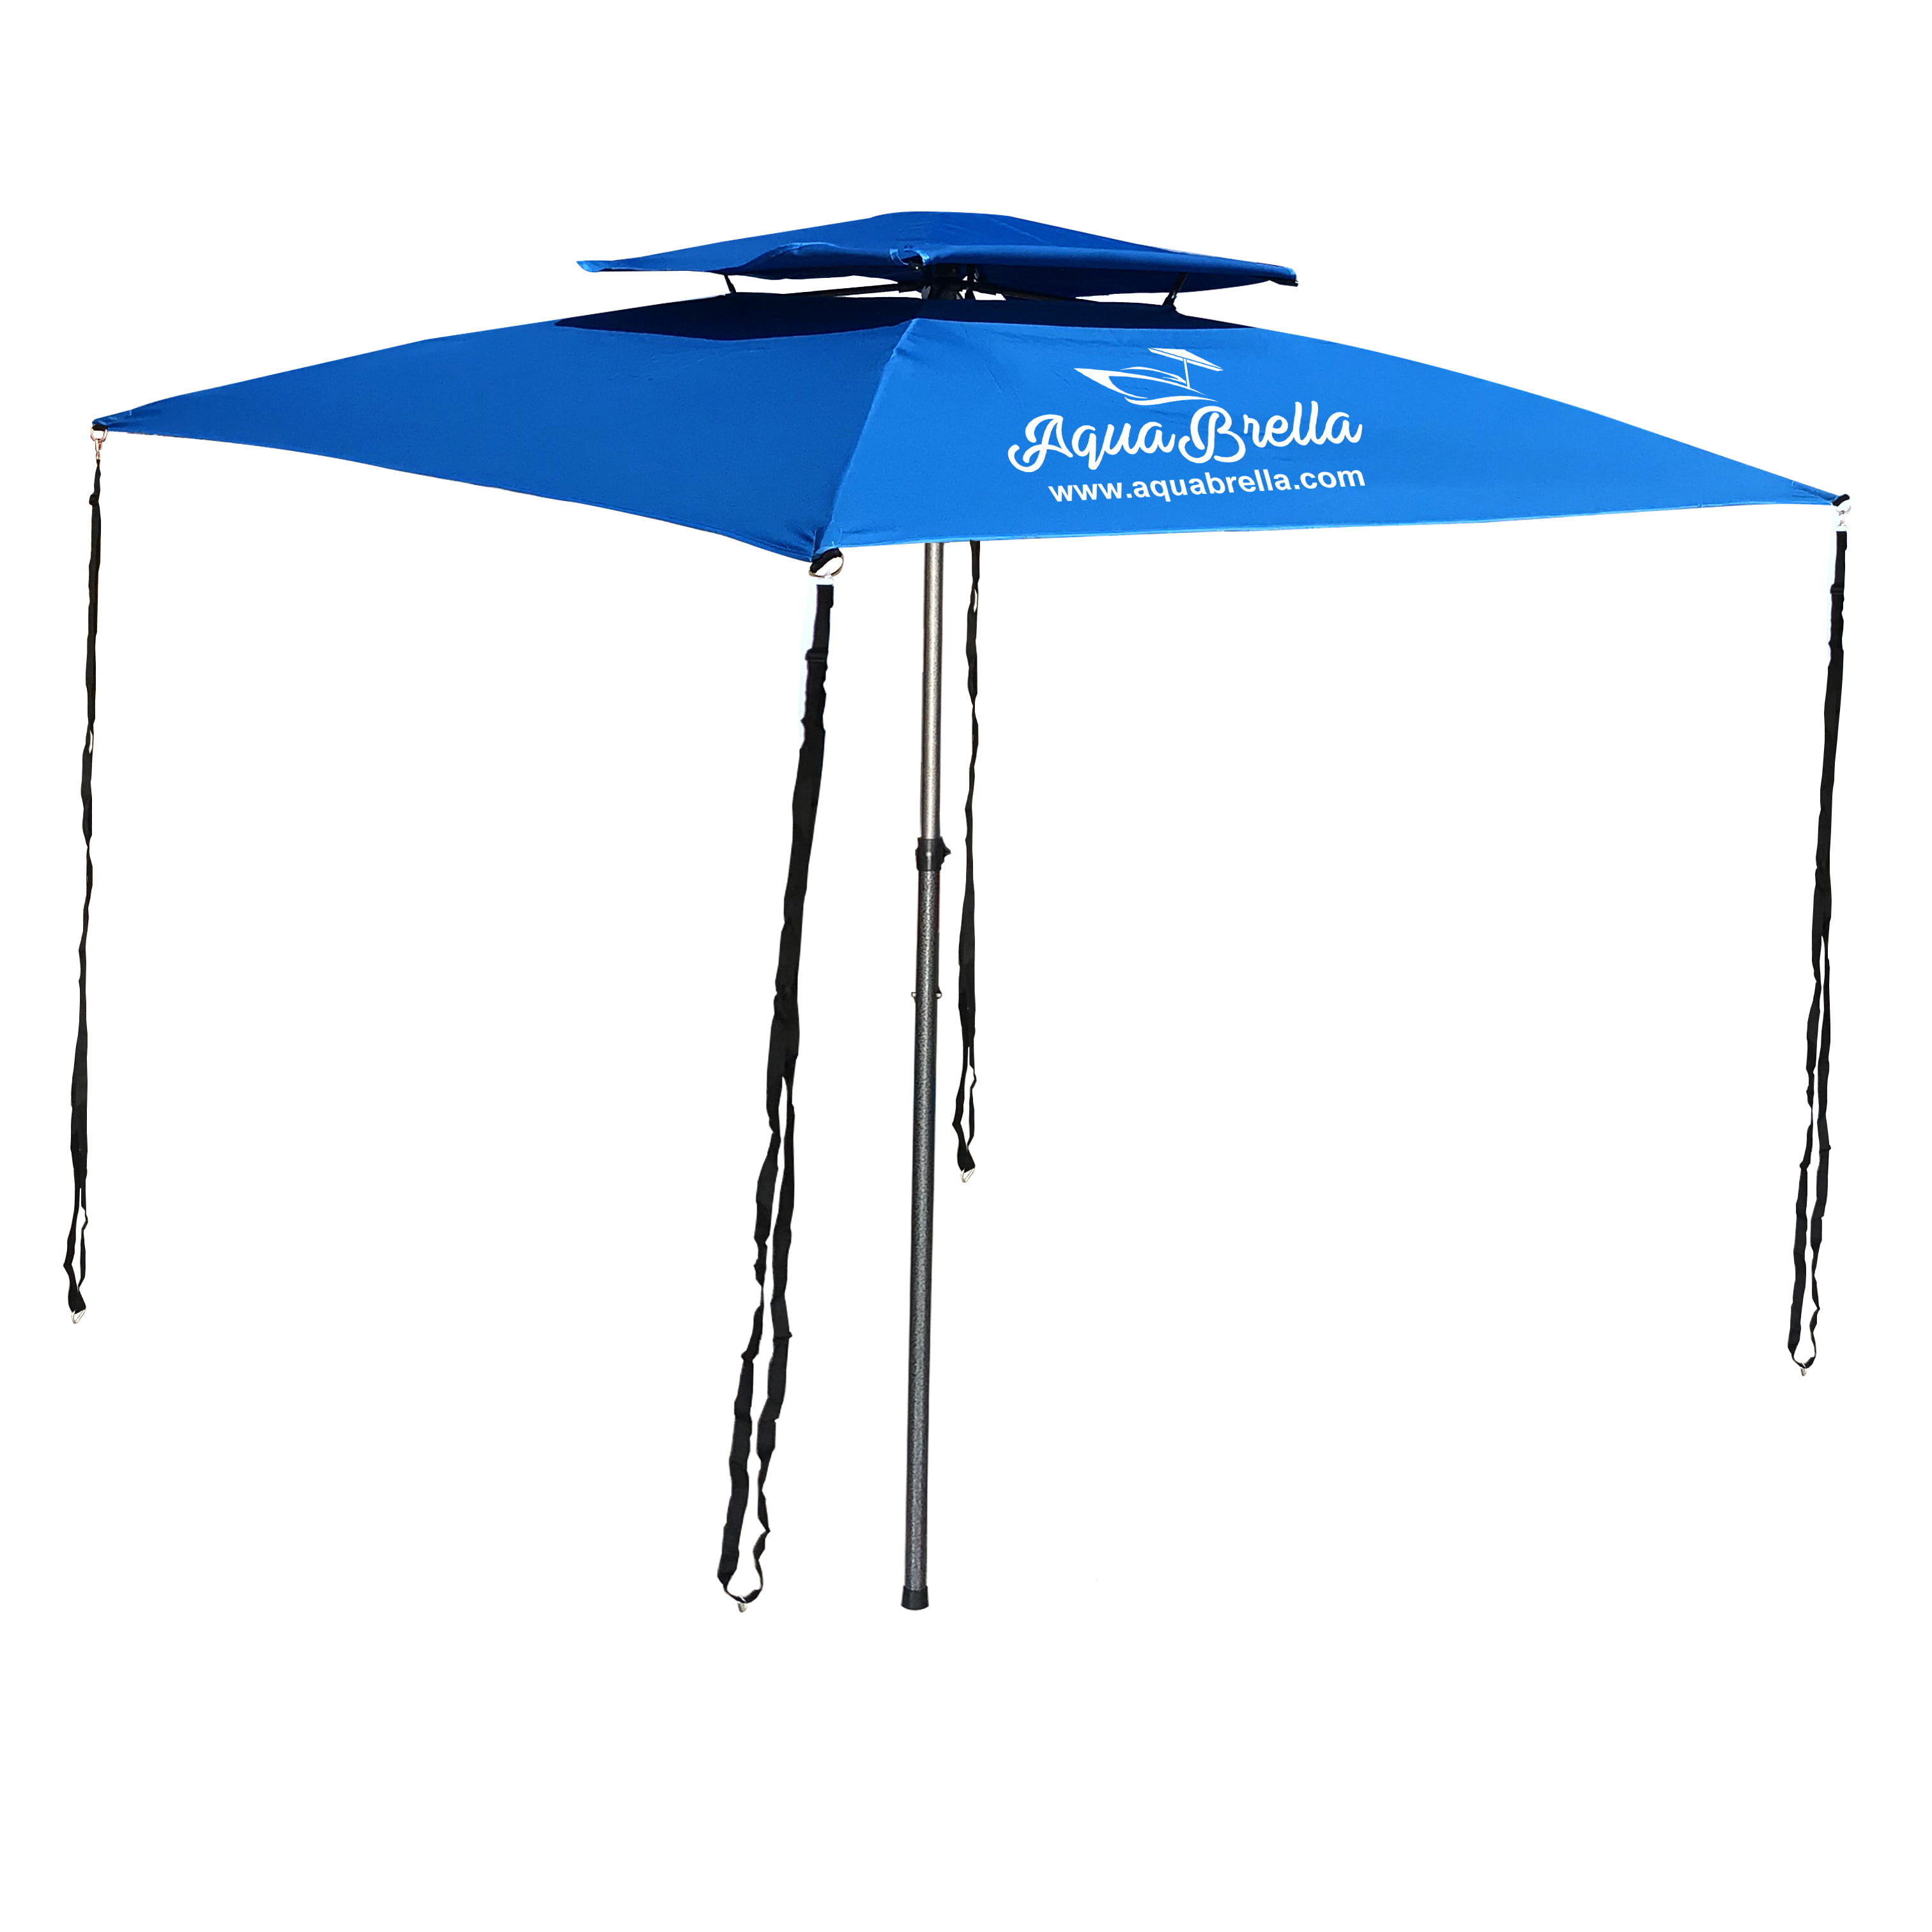 Large Size 6 Foot X 6 Foot EasyGoProducts AquaBrella The Portable Bimini Boat Top Cover Canopy